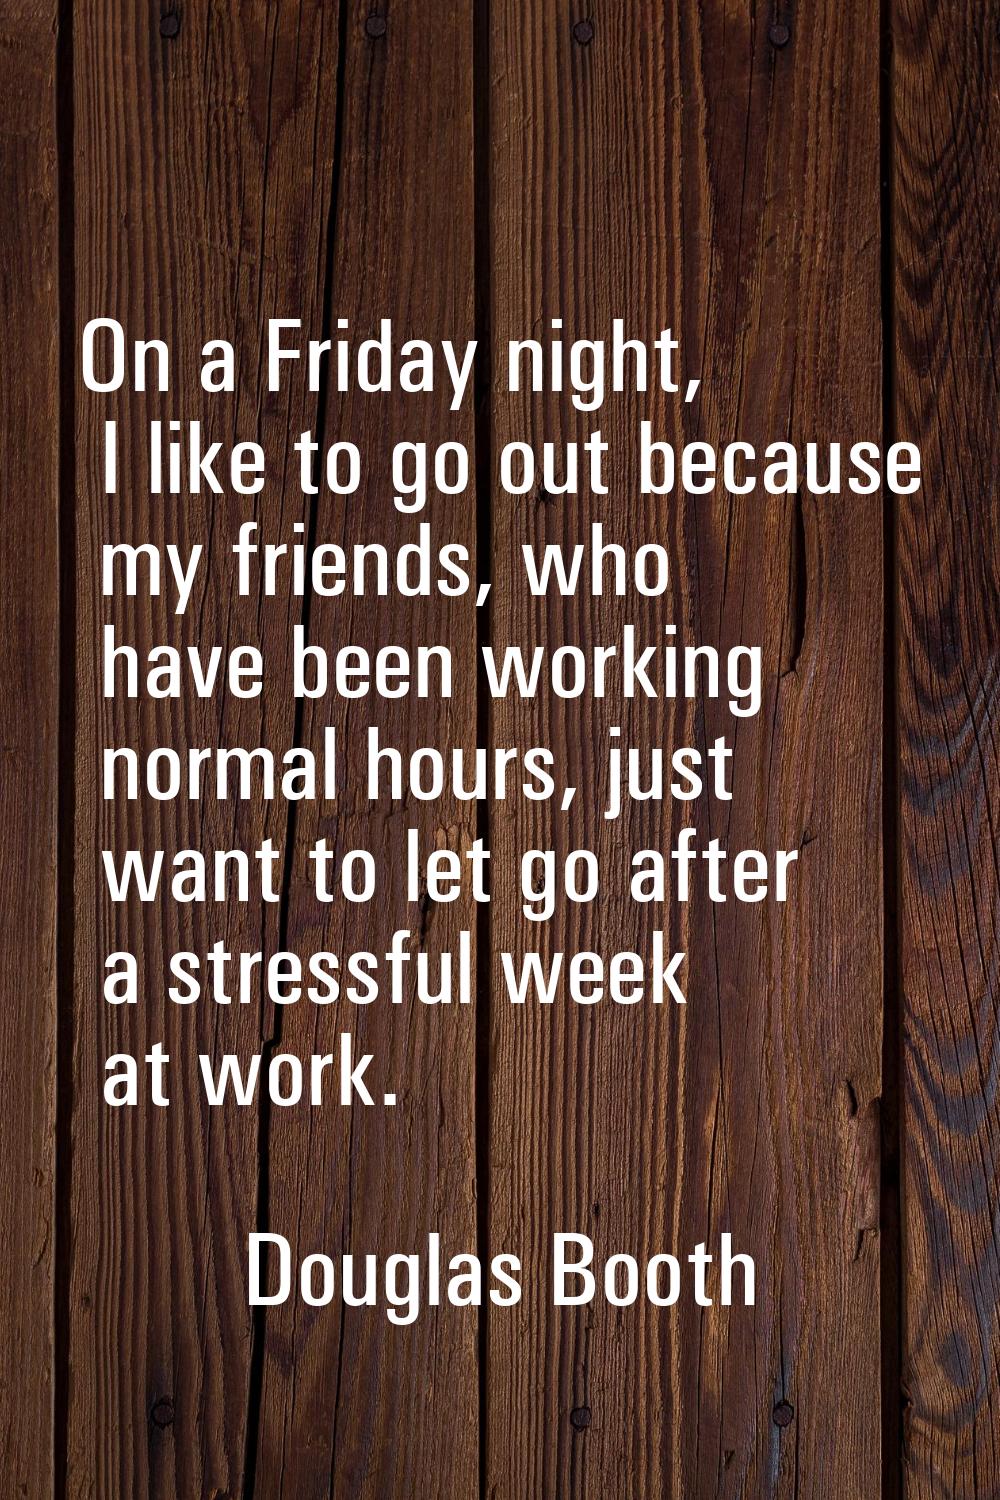 On a Friday night, I like to go out because my friends, who have been working normal hours, just wa